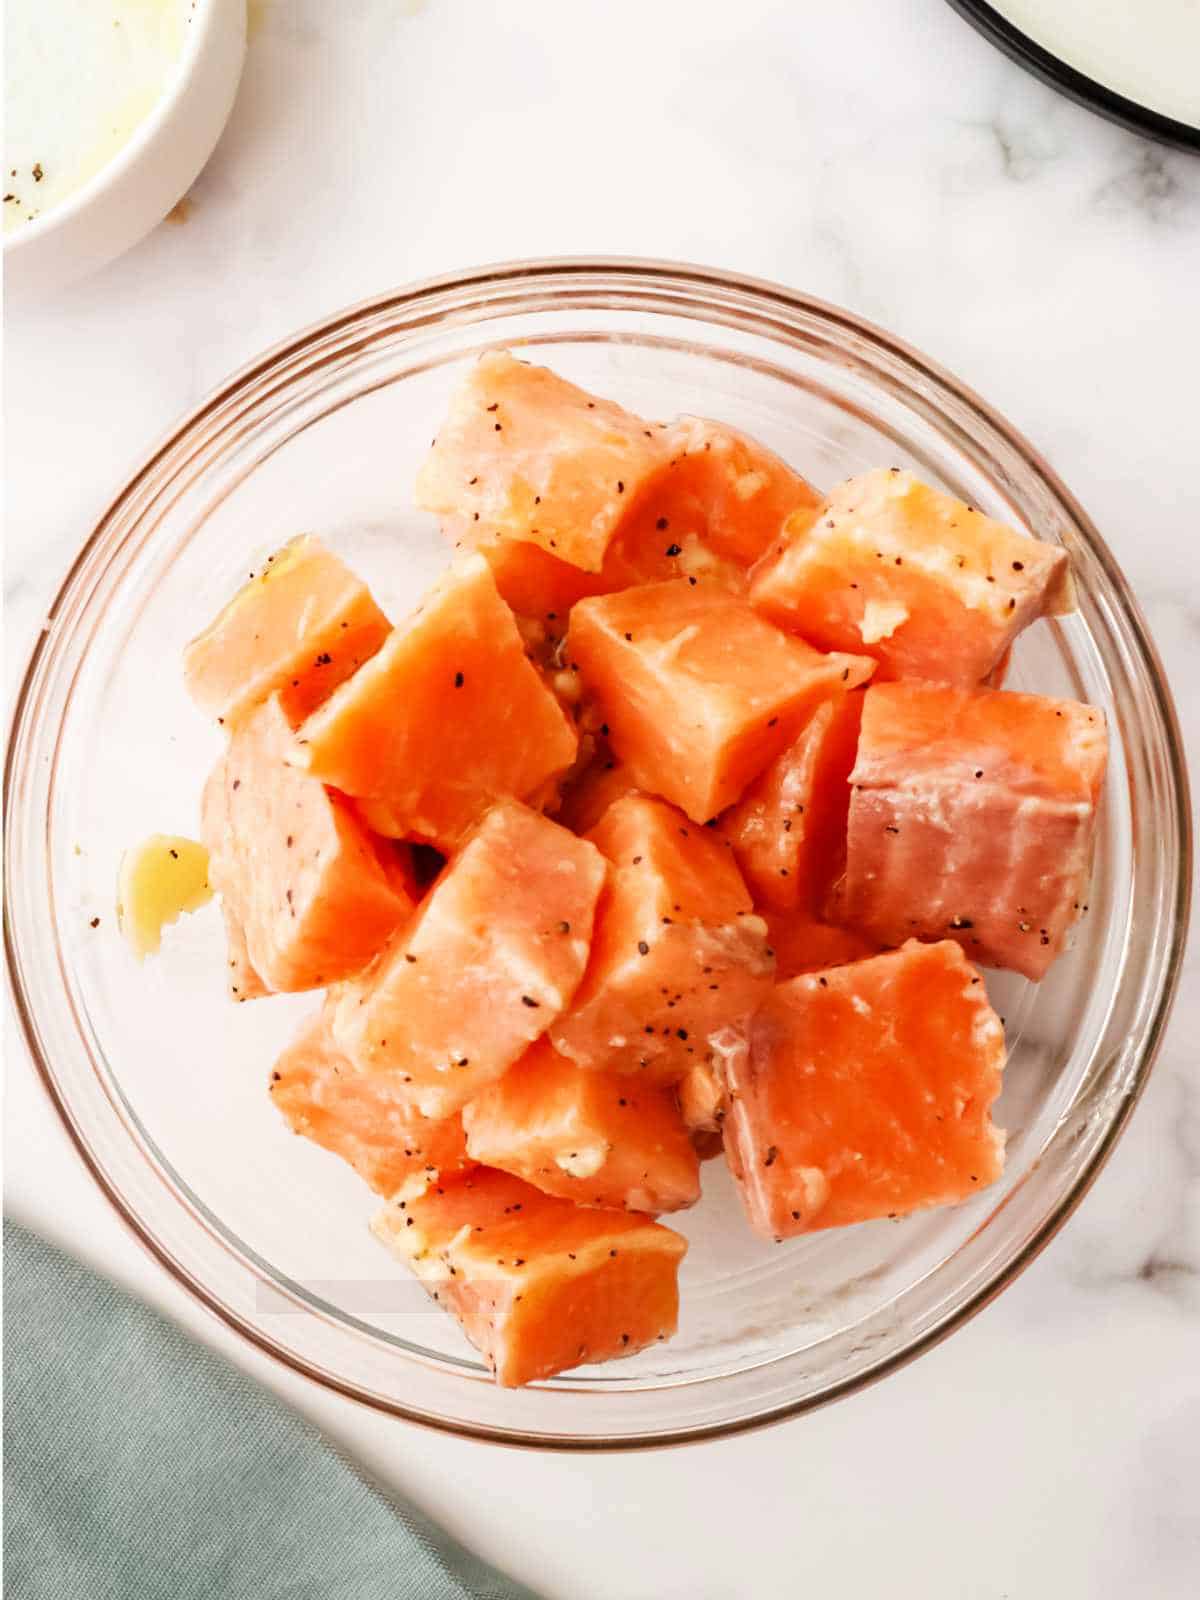 cubes of salmon in a bowl with butter seasoning.